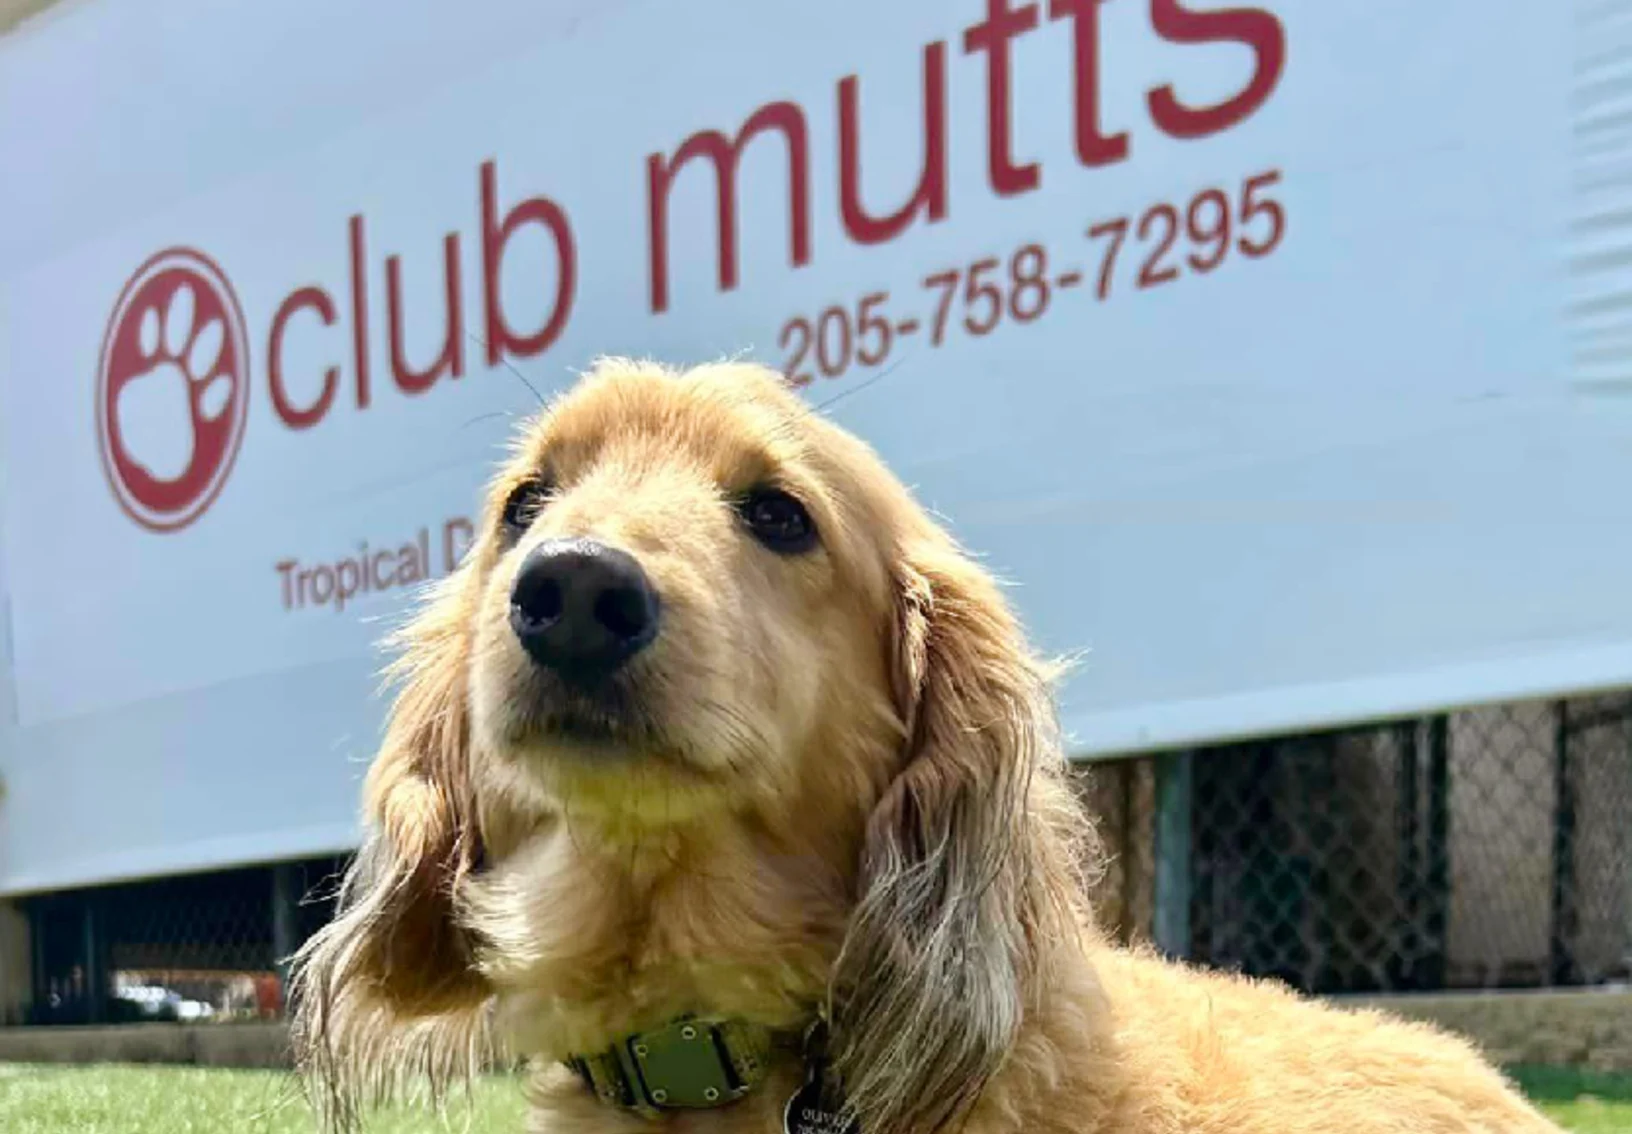 A small dog looking up with the Club Mutts sign in the background